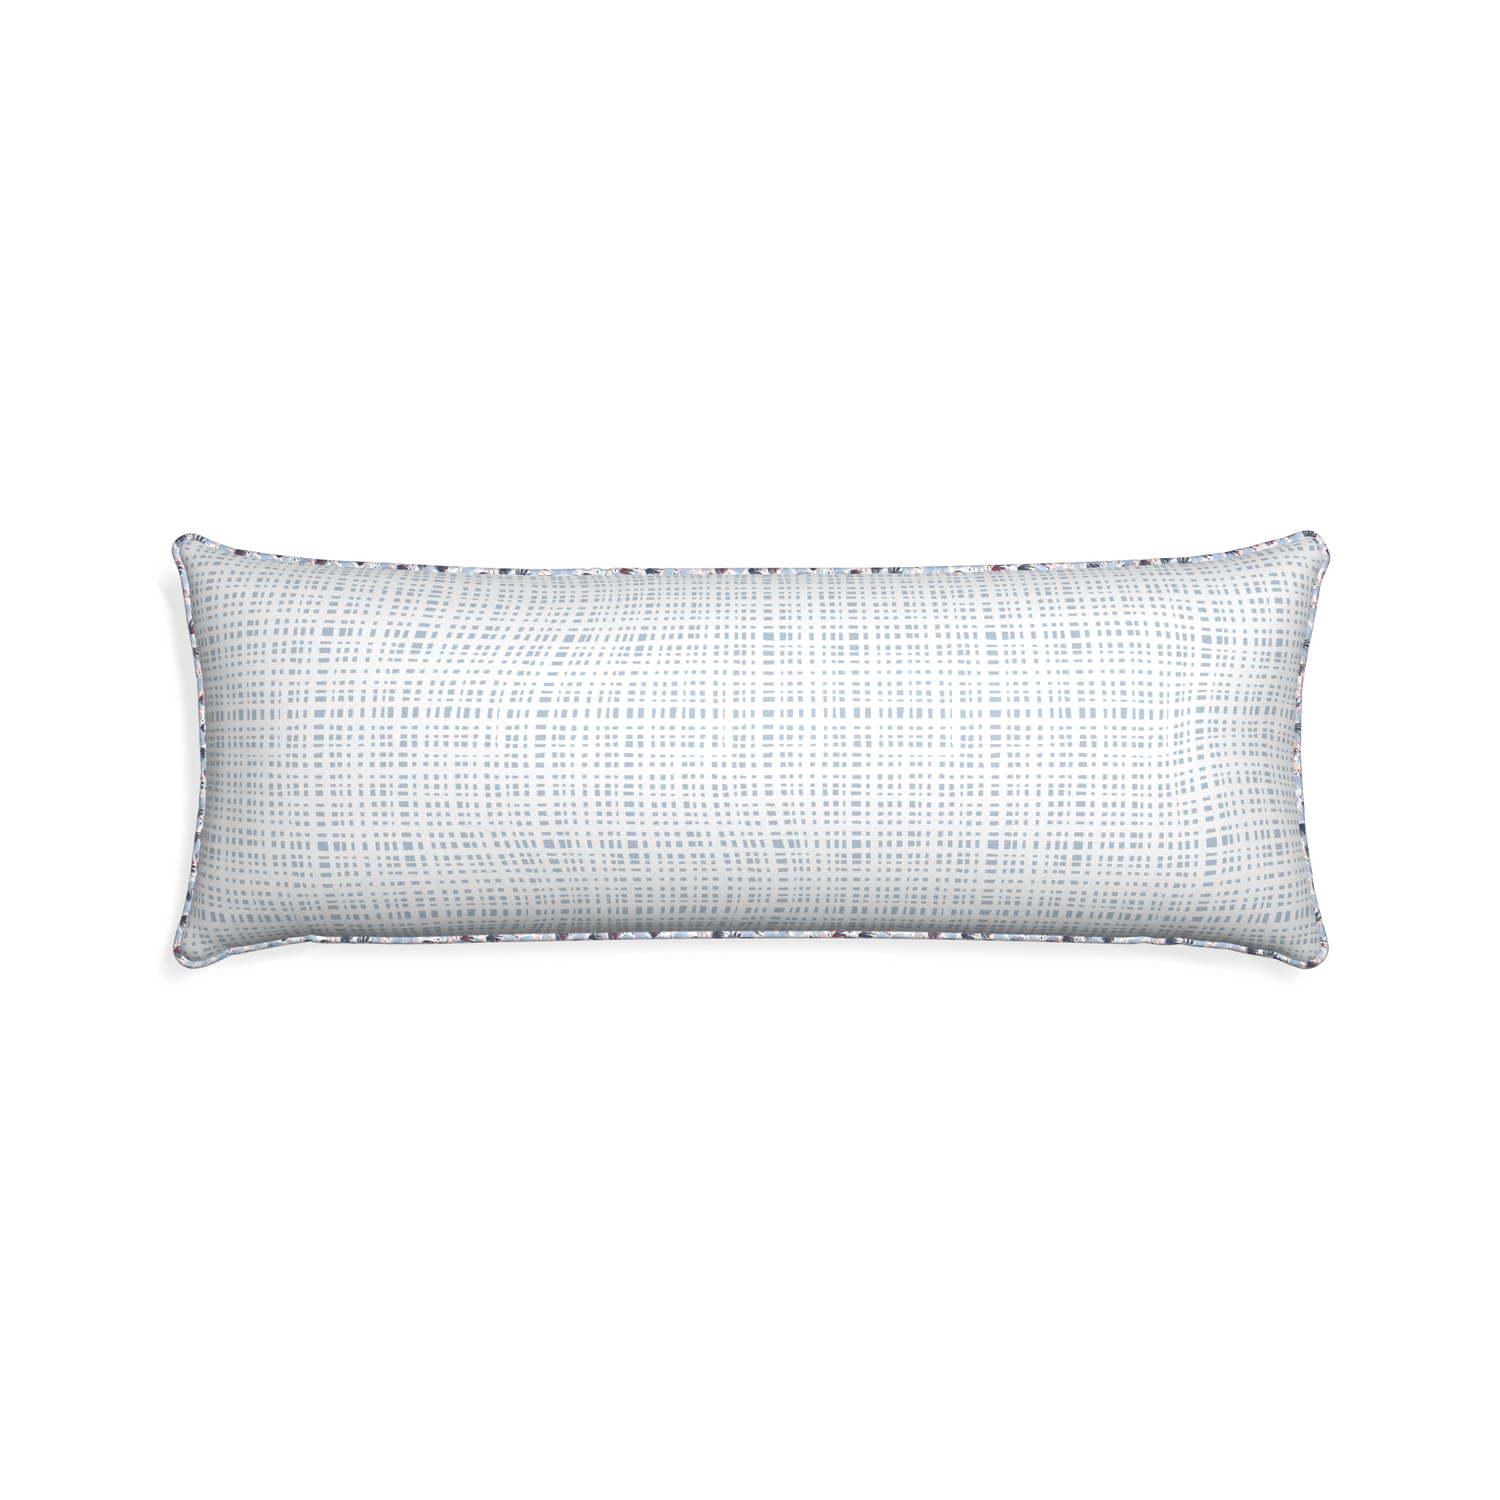 Xl-lumbar ginger custom plaid sky bluepillow with e piping on white background